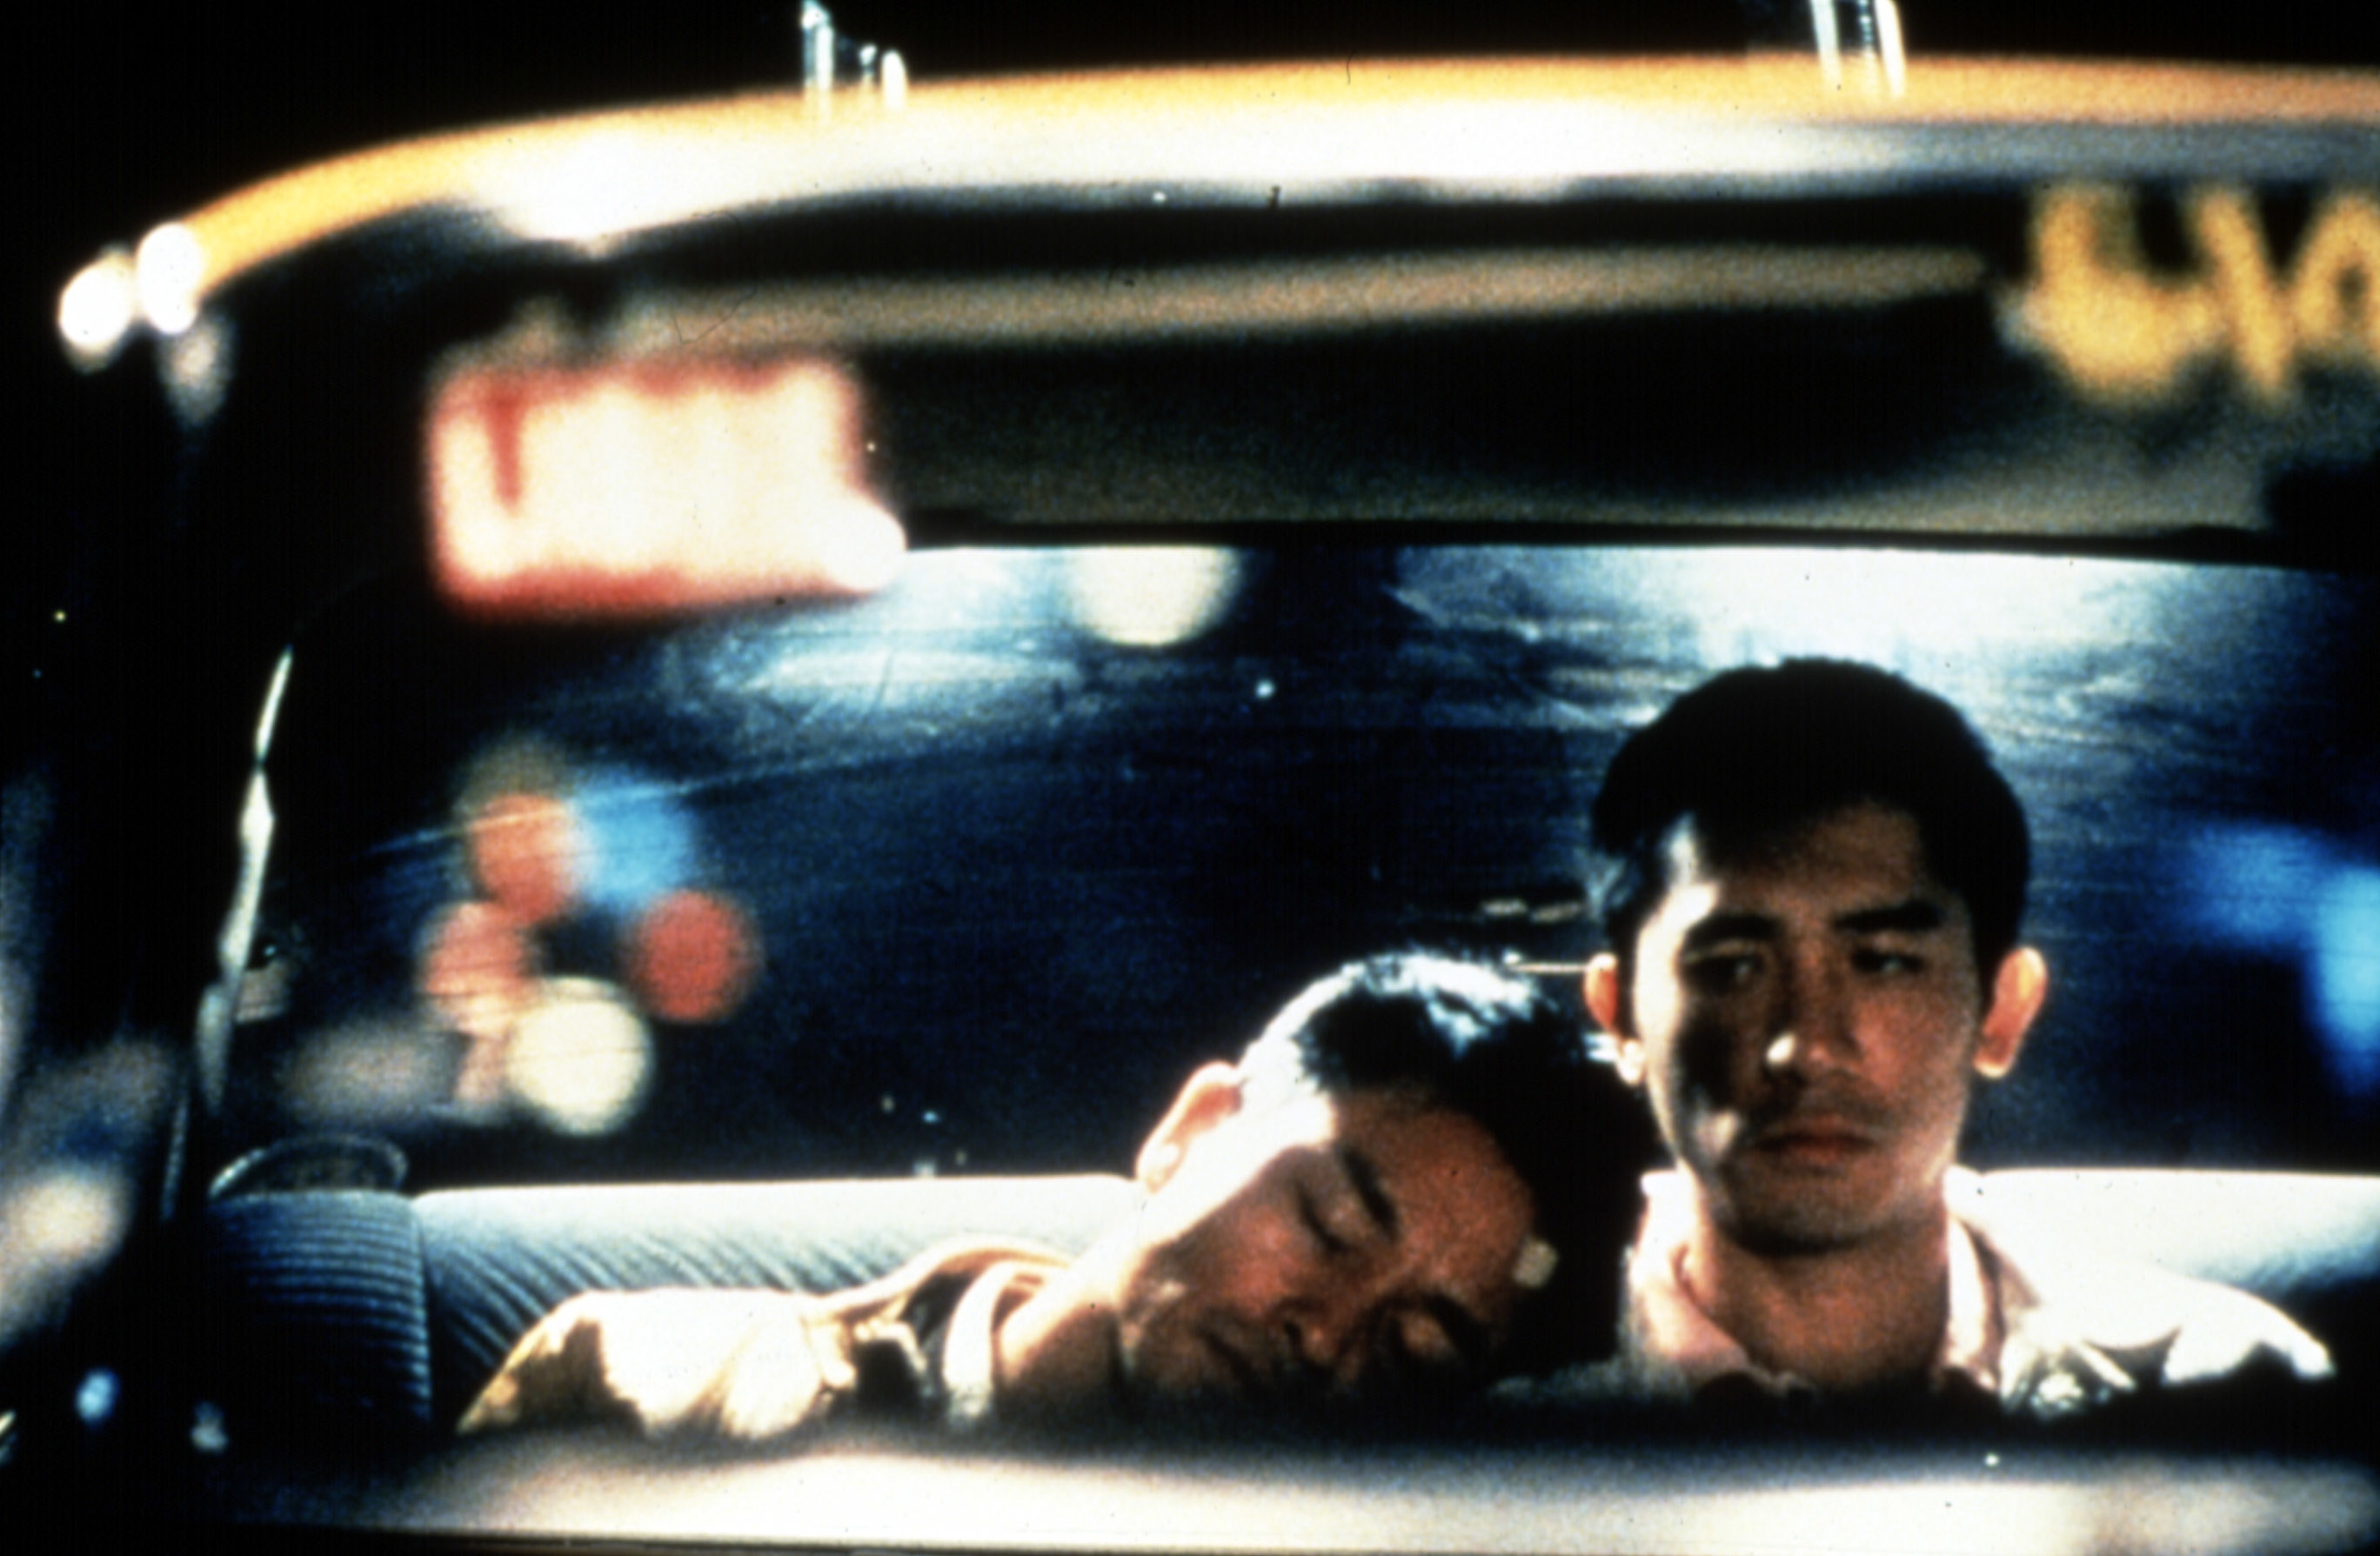 image of a man resting his head on another man in a car